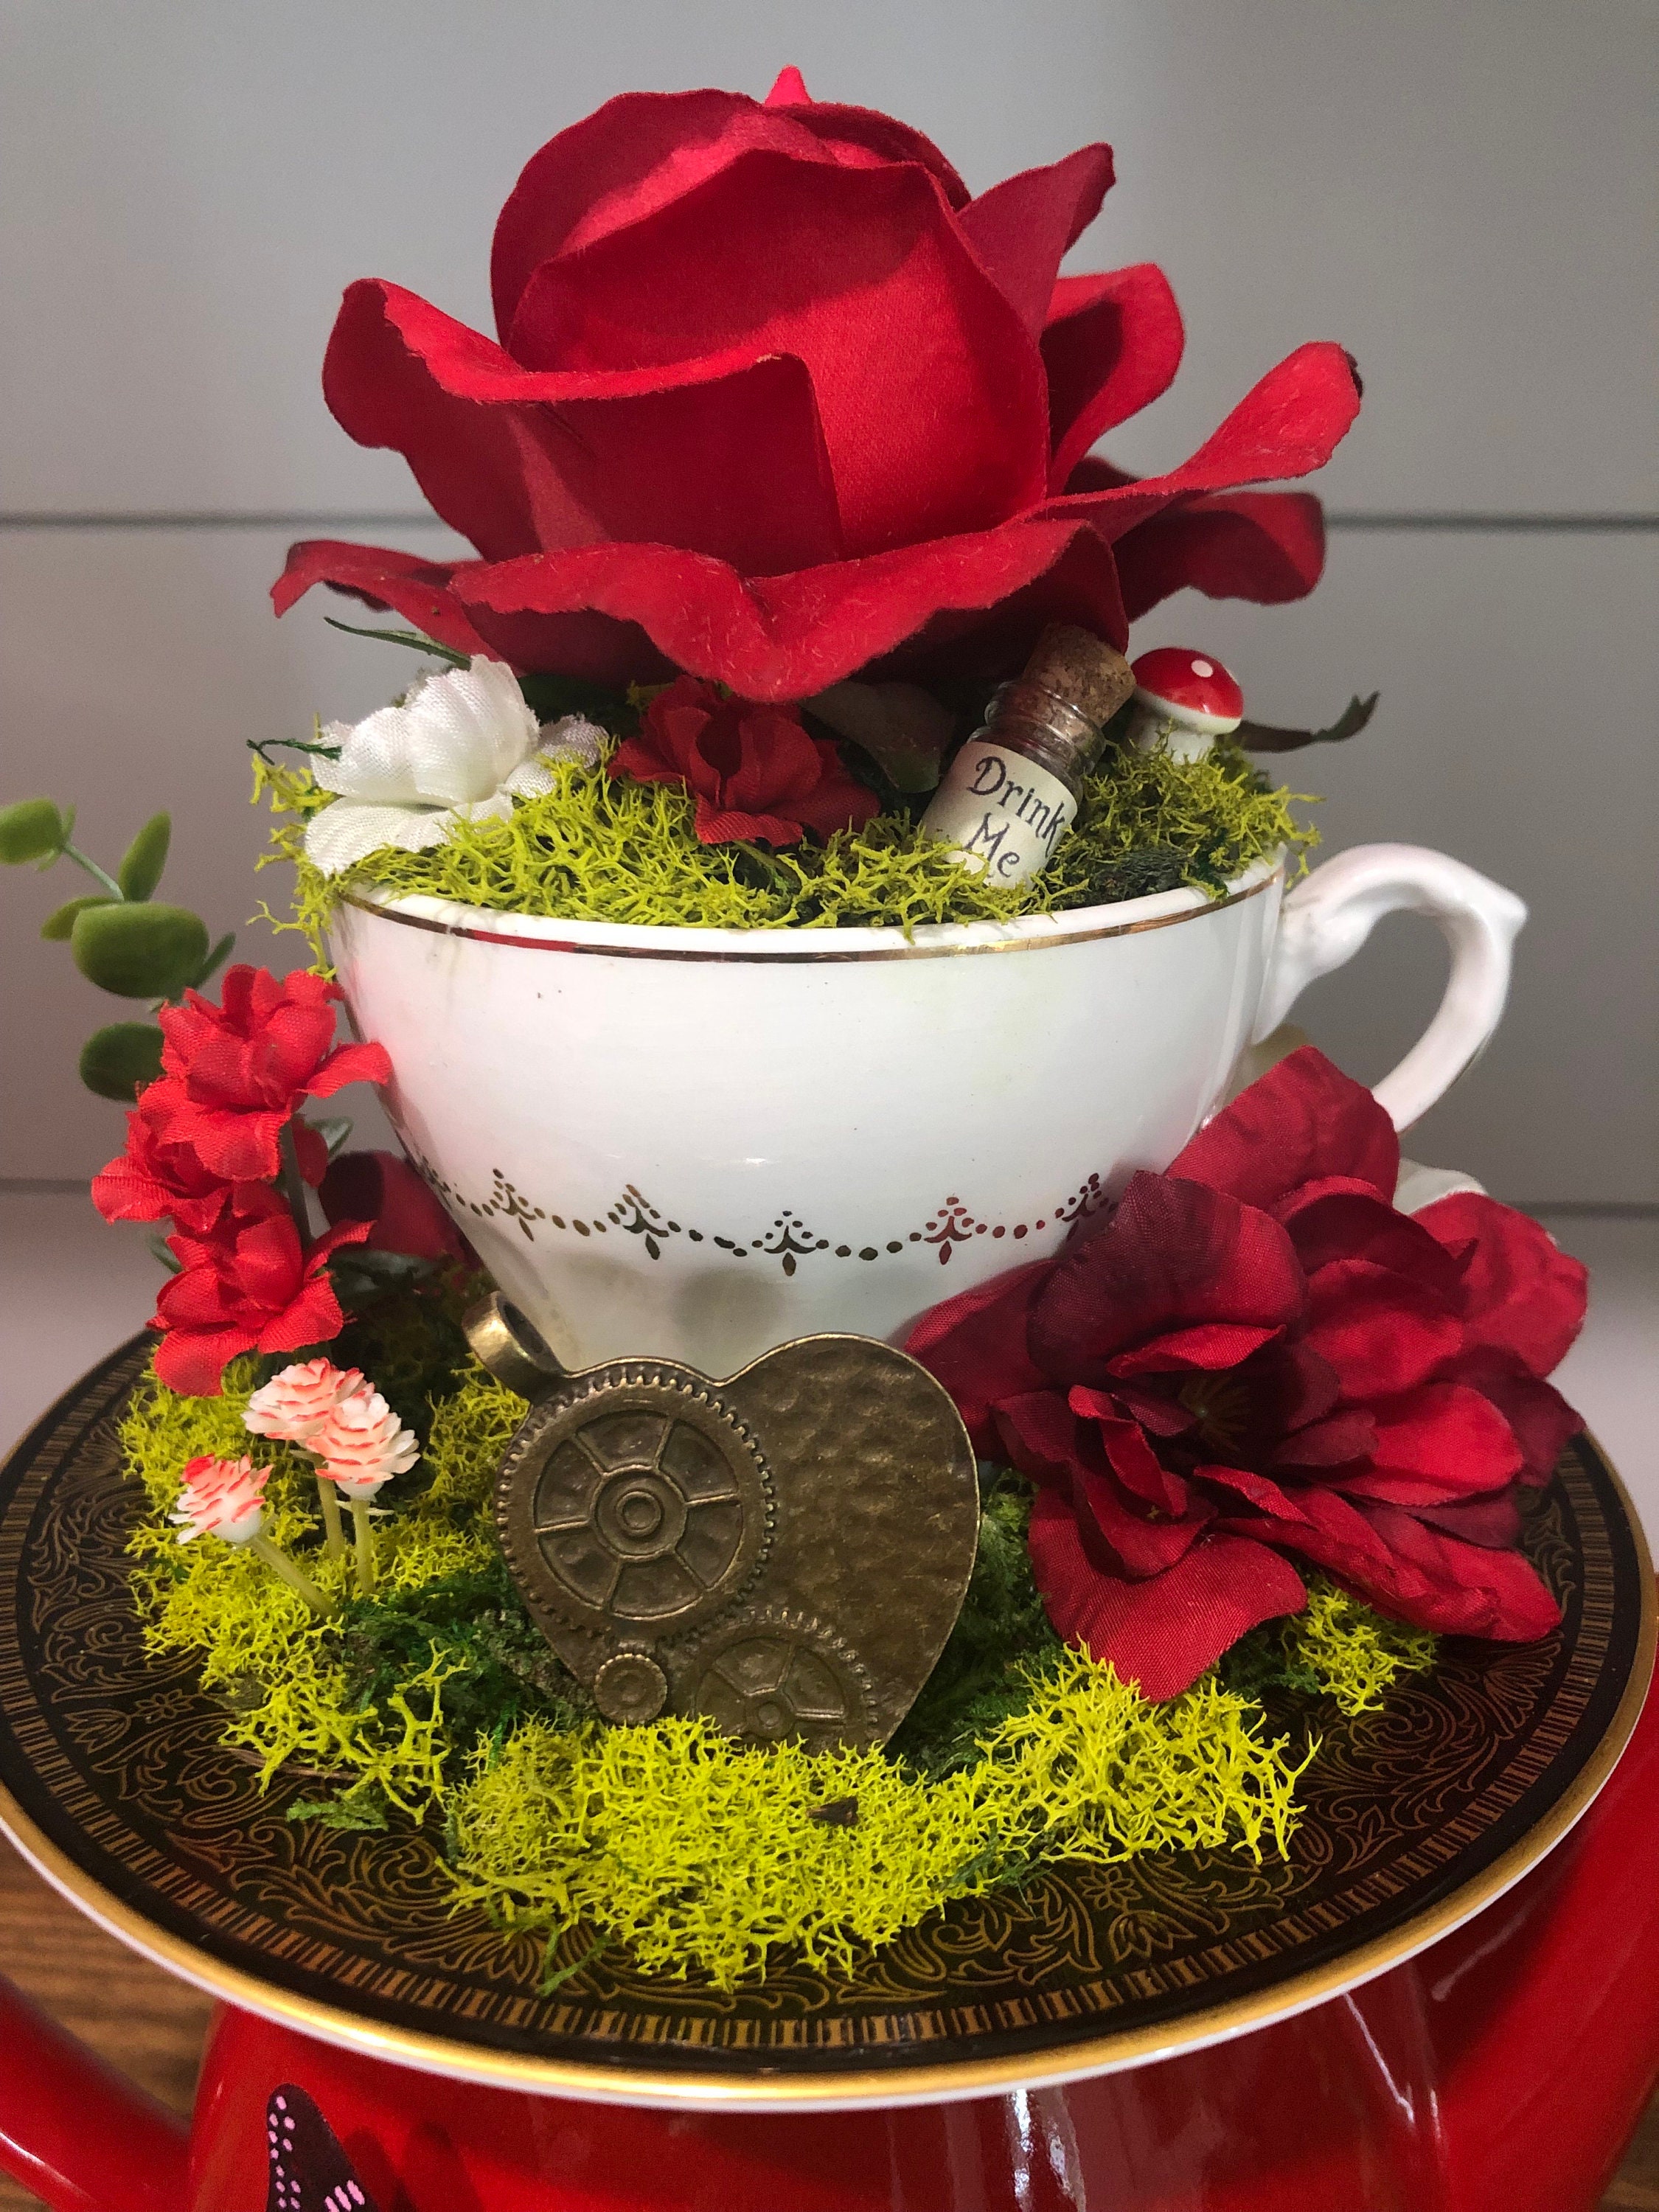 Alice in Wonderland, Mad Hatter, Tea Party Centerpiece, Teacup, Bridal  Shower, Decoration, Baby Shower, Mothers Day Gift, Fall Decor 